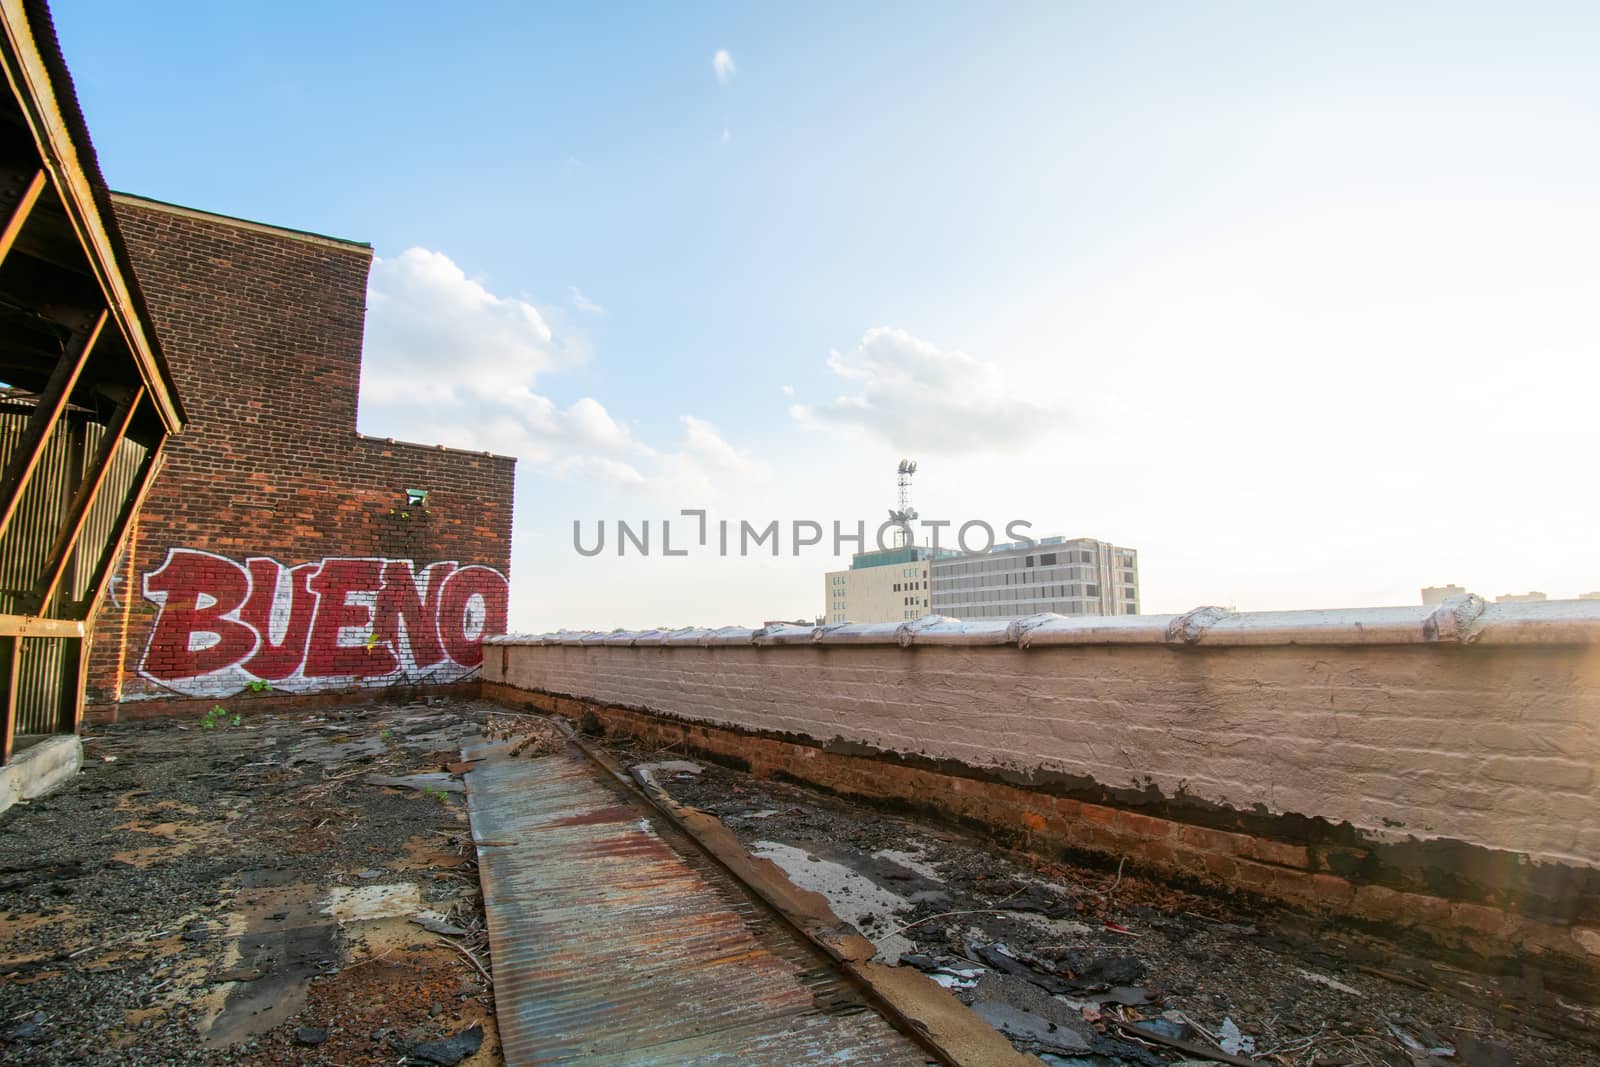 A Rooftop View on an Abandoned Building With a Graffiti Tag that by bju12290